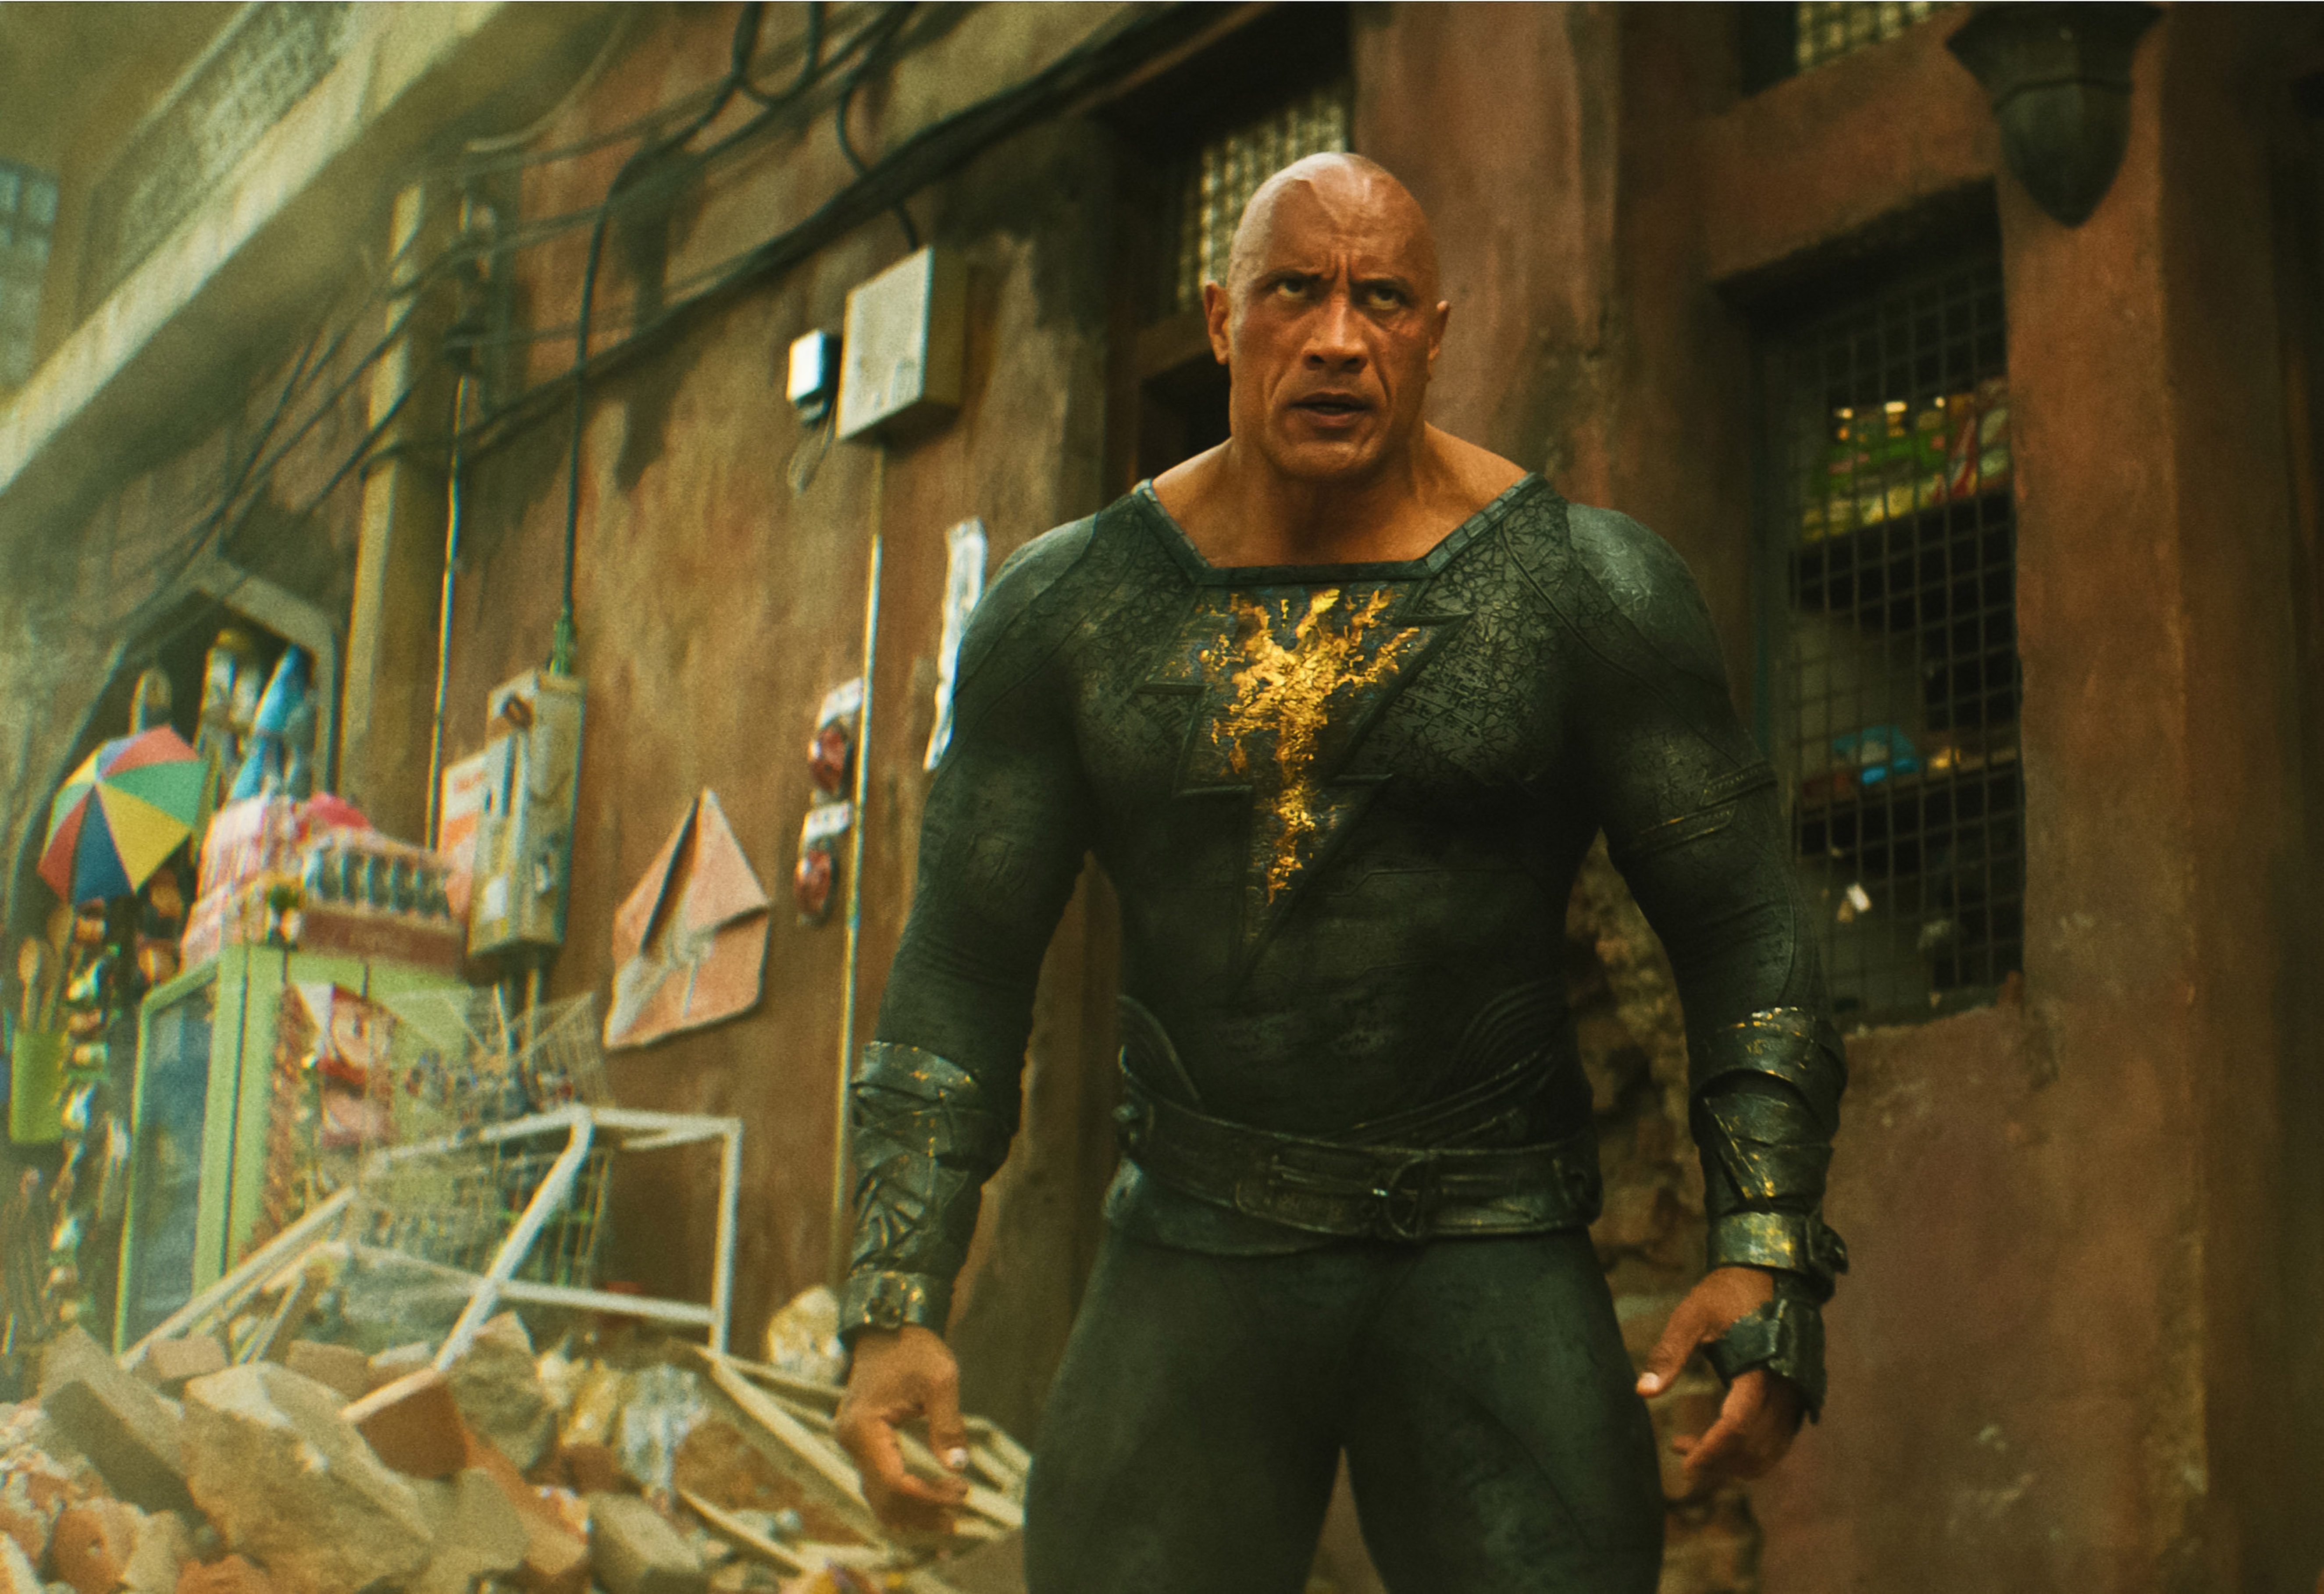 All the Wild 'Black Adam' Cameos That Stunned DC Fans